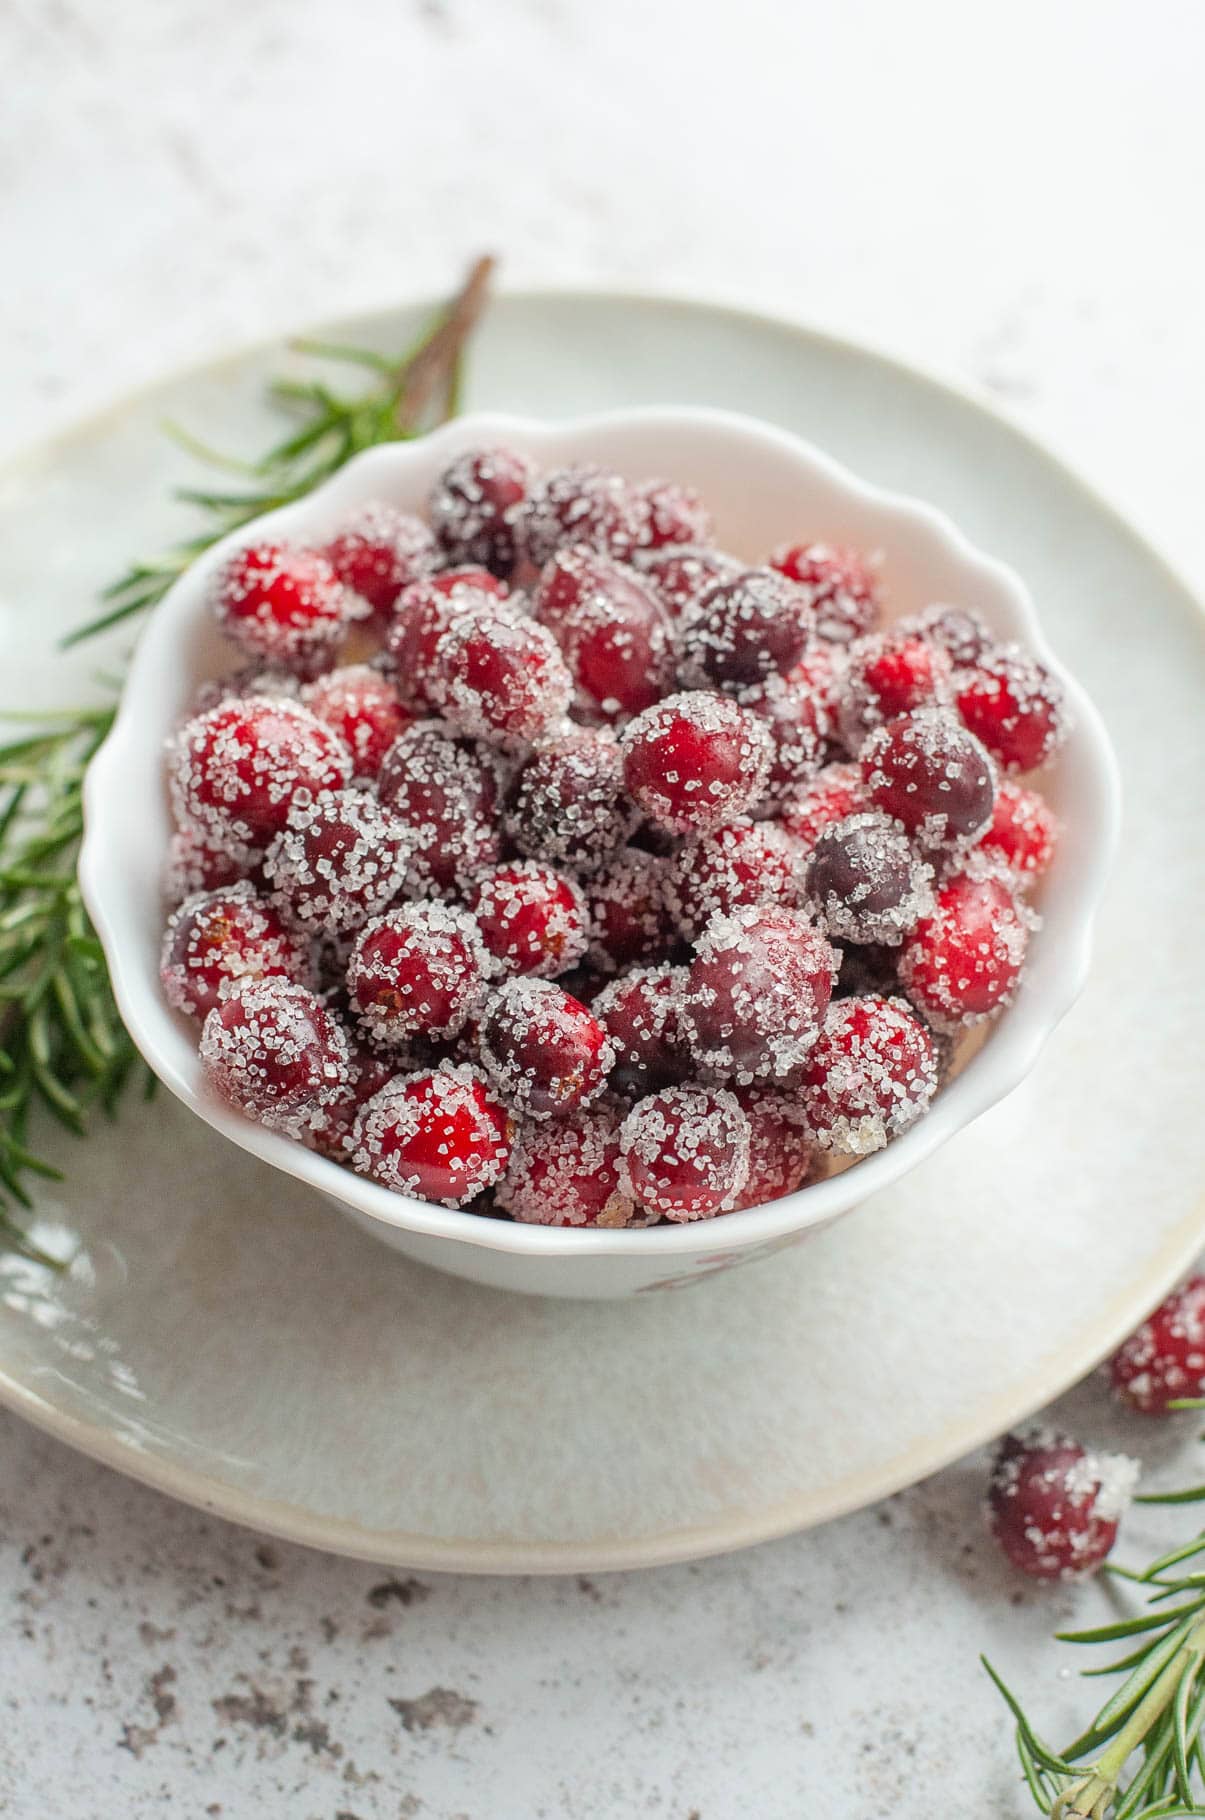 Easy Sugared Cranberries Recipe - How to Make Sugared Cranberries